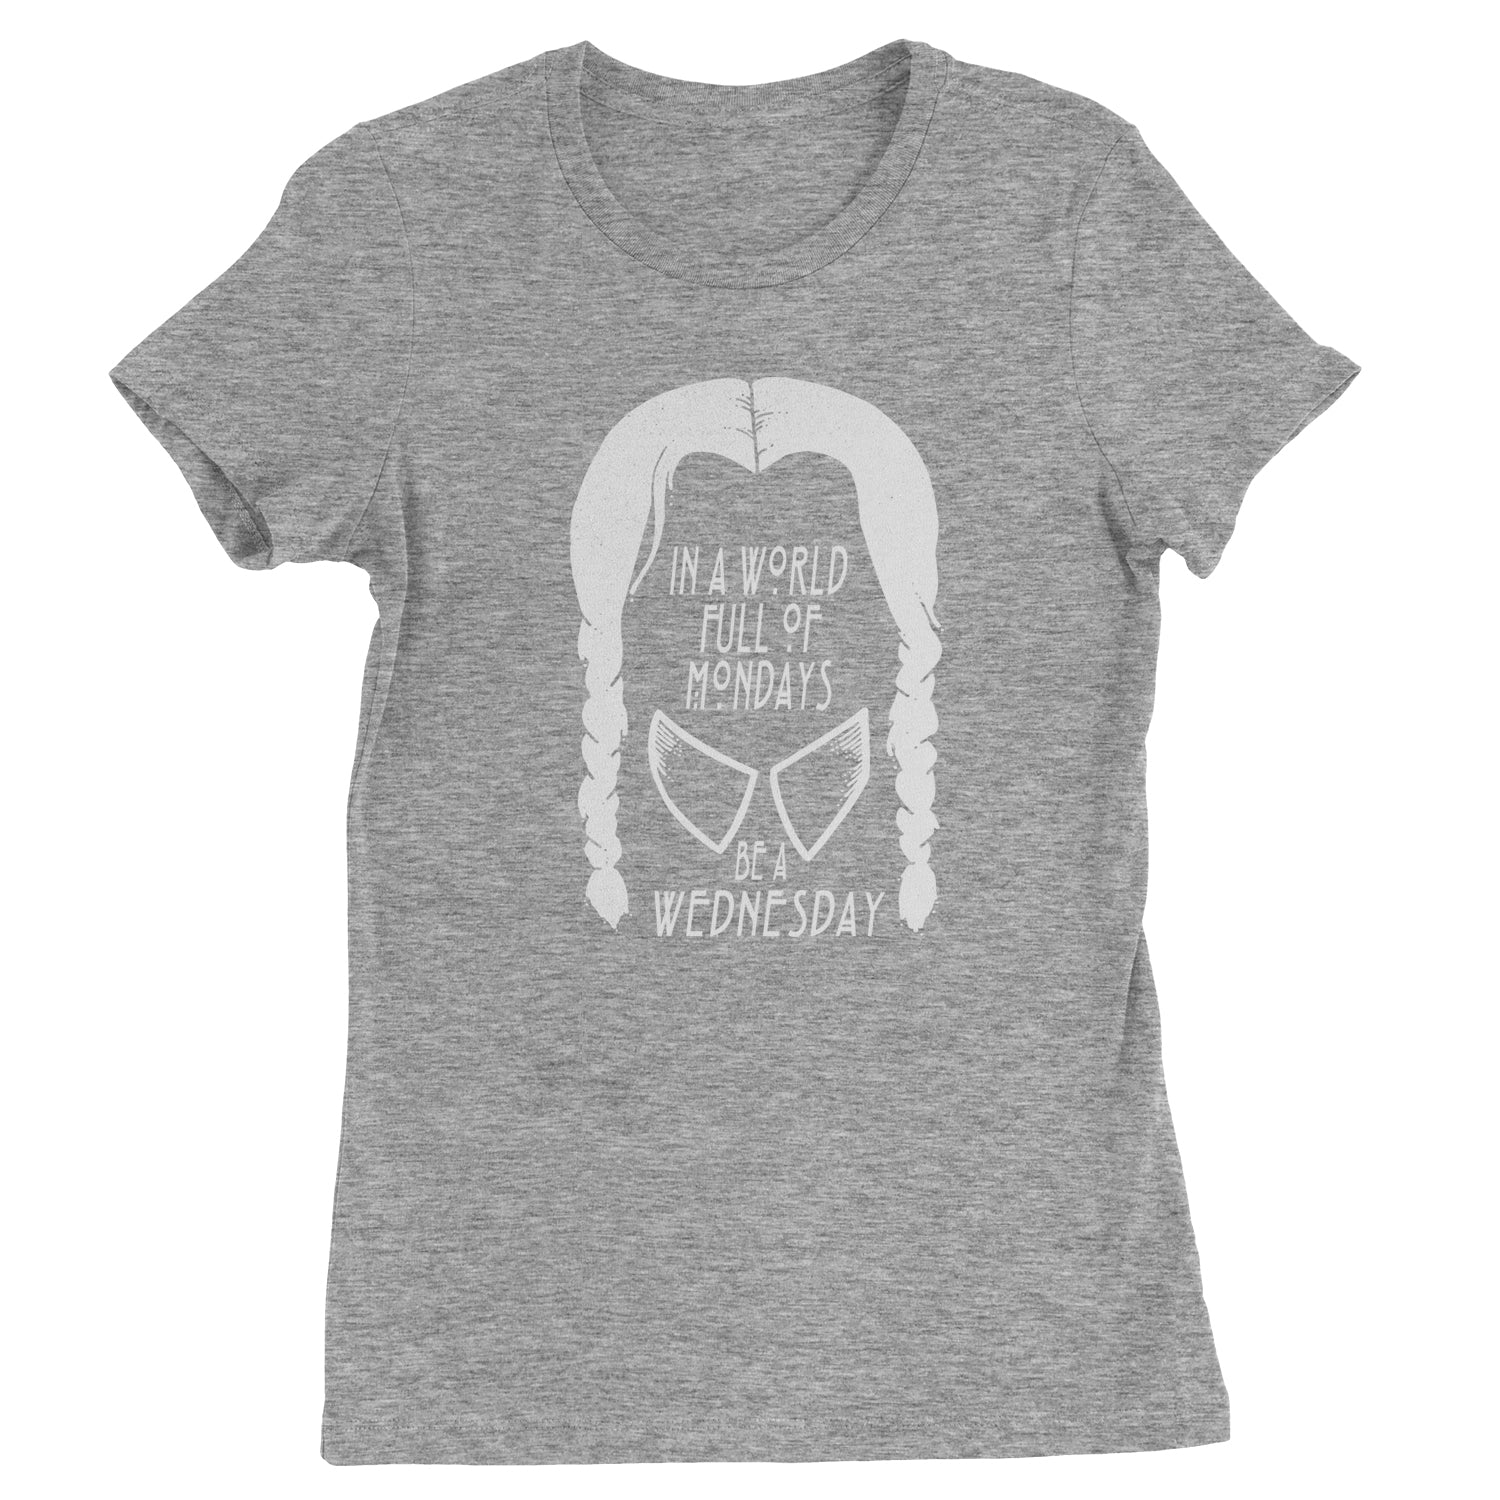 In A World Full Of Mondays, Be A Wednesday Womens T-shirt academy, jericho, more, never, nevermore, vermont, Wednesday by Expression Tees